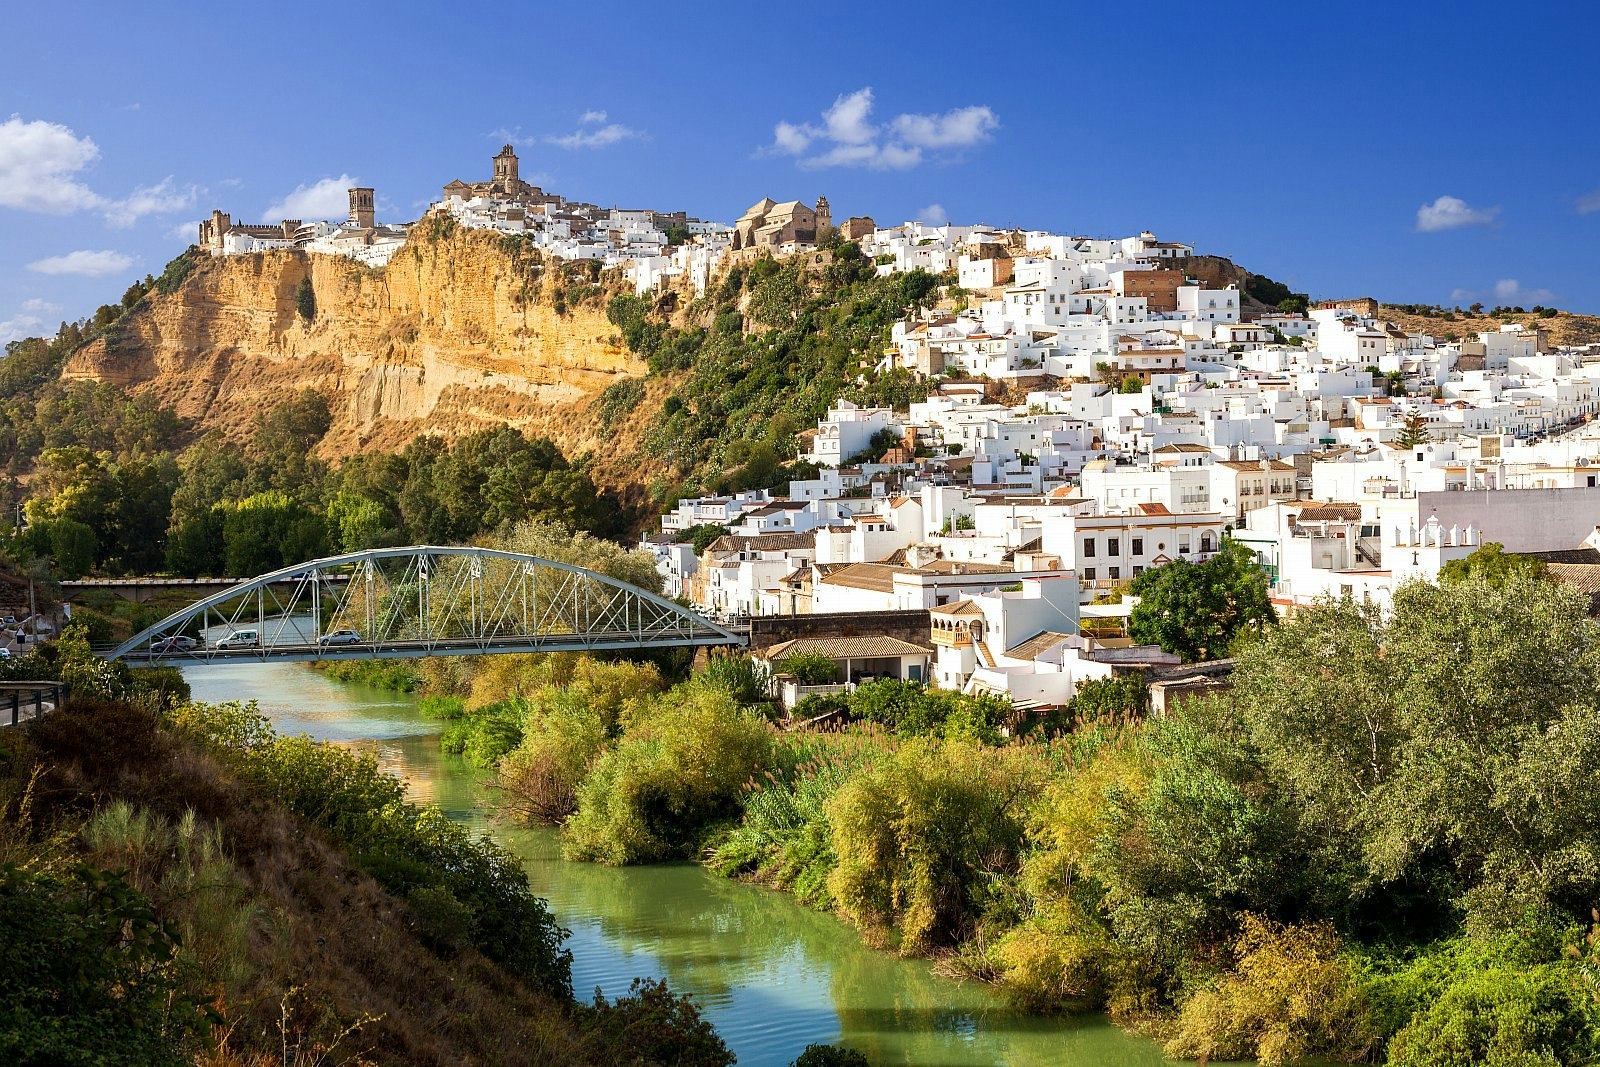 Looking out over Arcos de la Frontera, a town of white houses built on a rocky outcrop along the Guadalete river, which is crossed by a tied arch bridge.